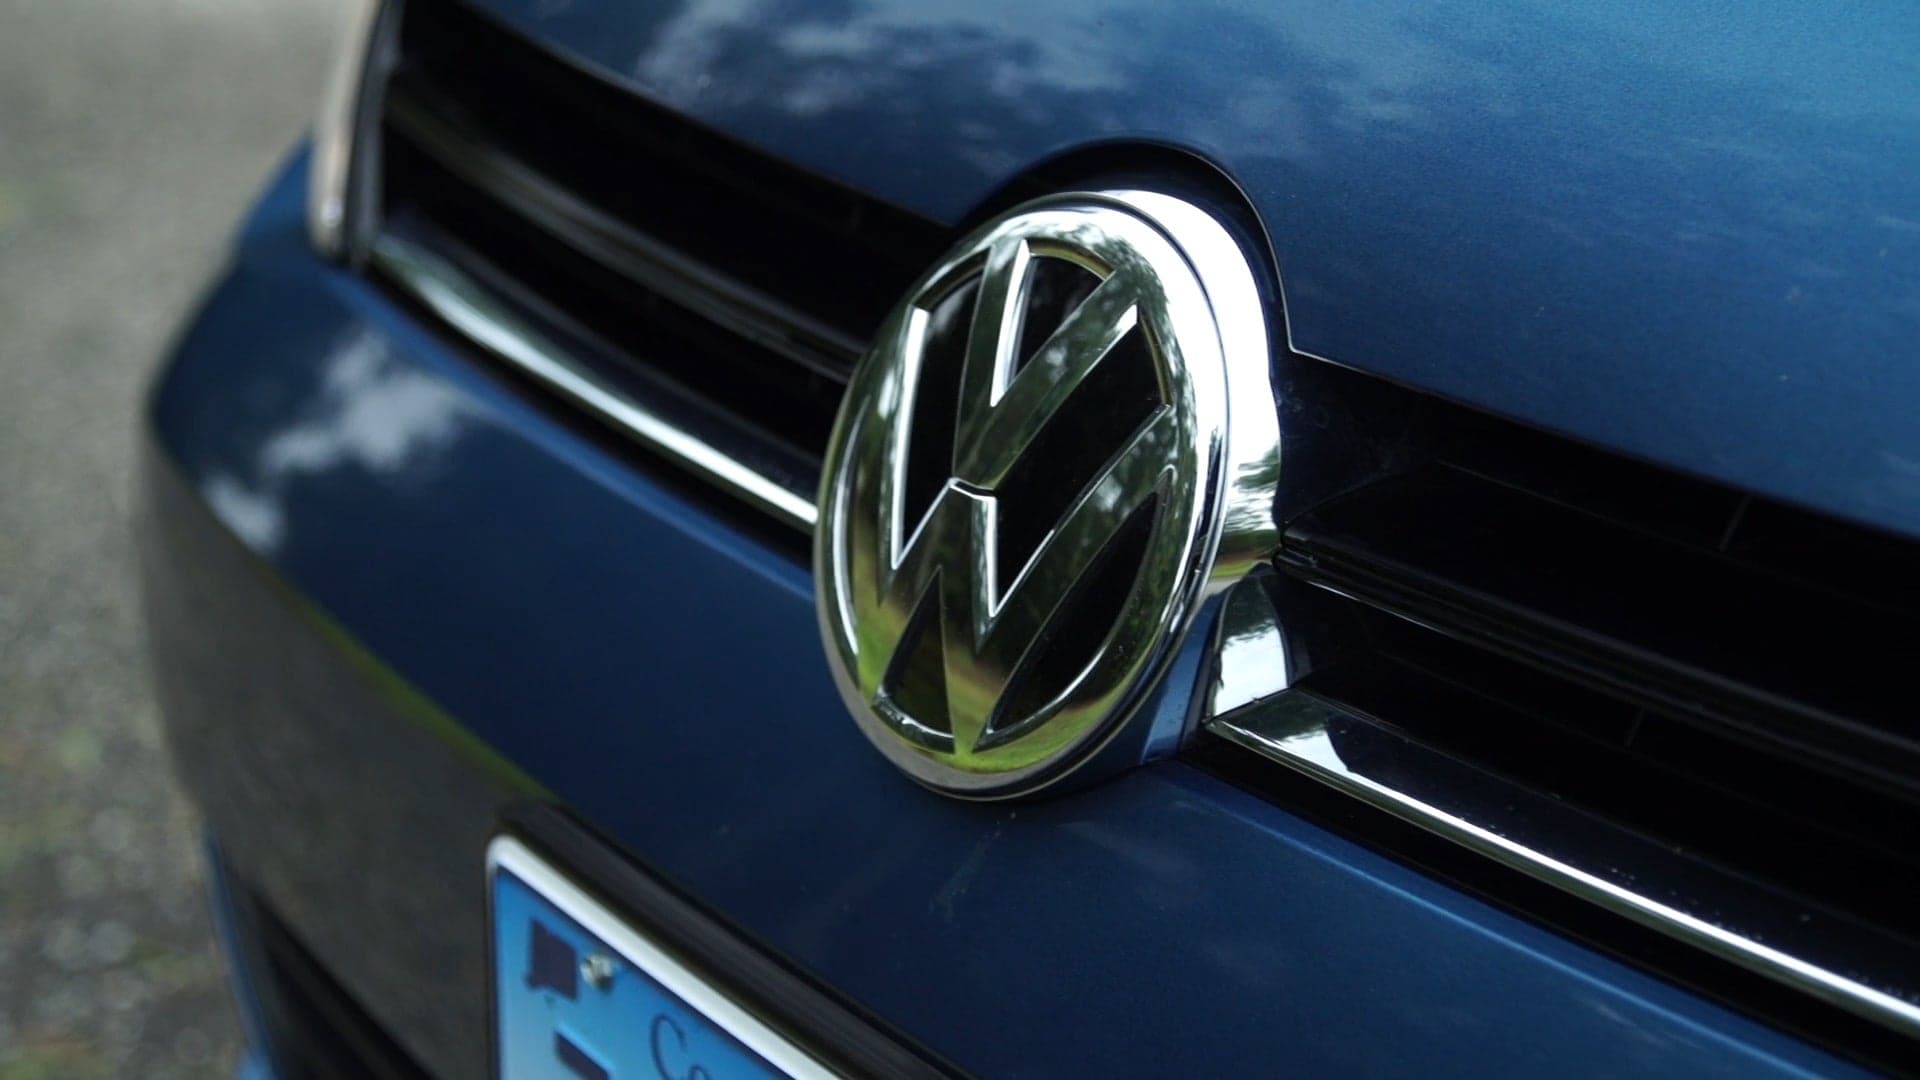 VW Sentenced To 3 Years of Probation and Oversight as Part of Dieselgate Settlement